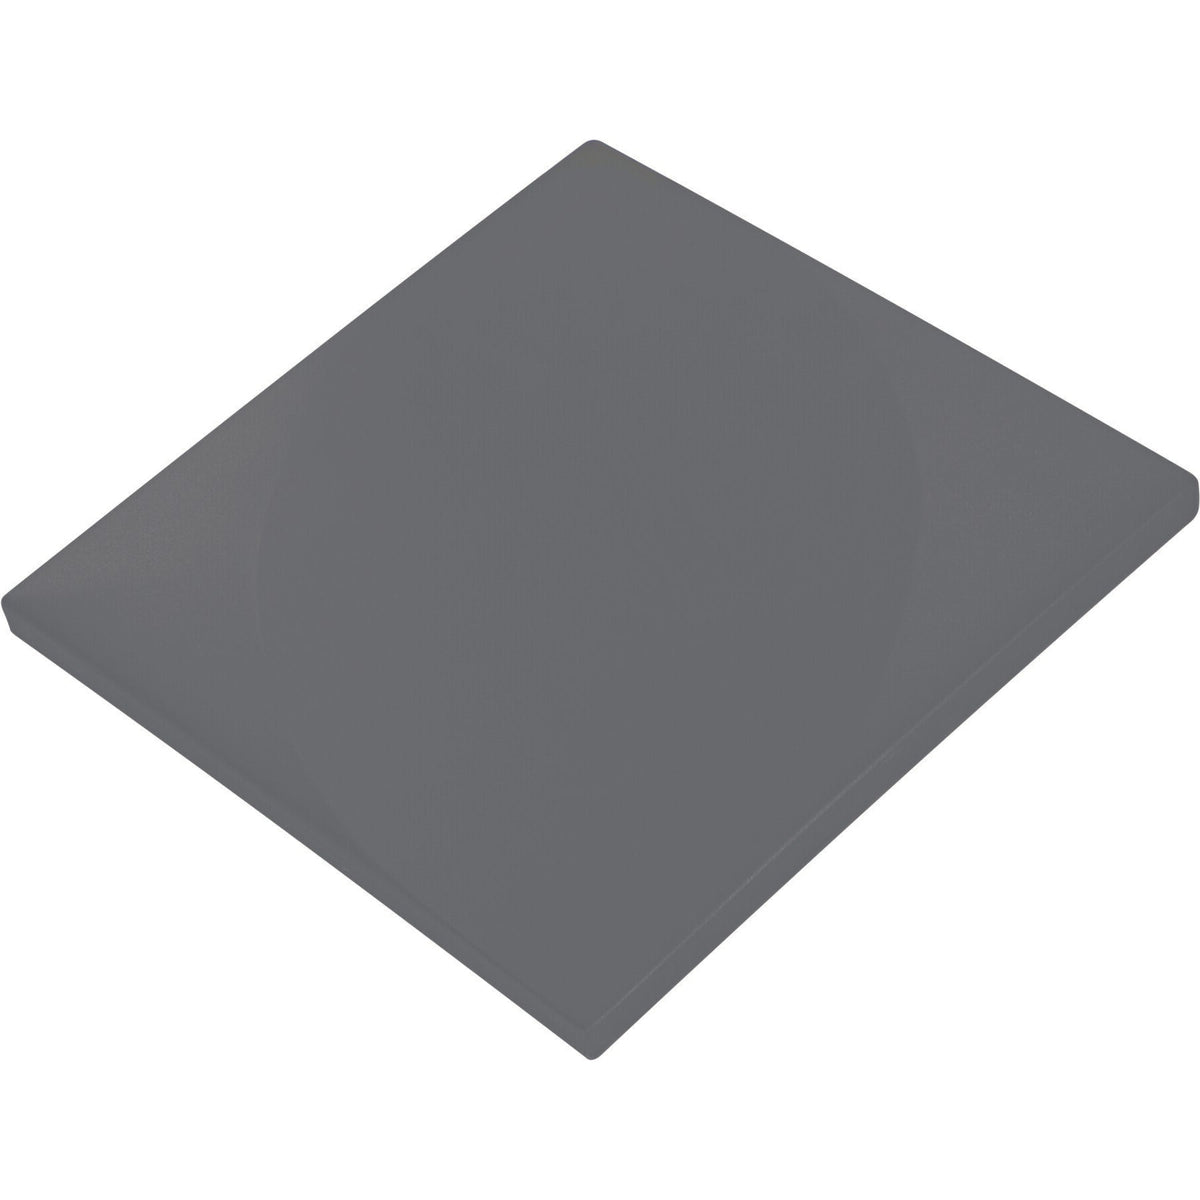 Daltile - STARE™ Collection - Electric 6 in. x 6 in. Tile - Petal Volt Carbon